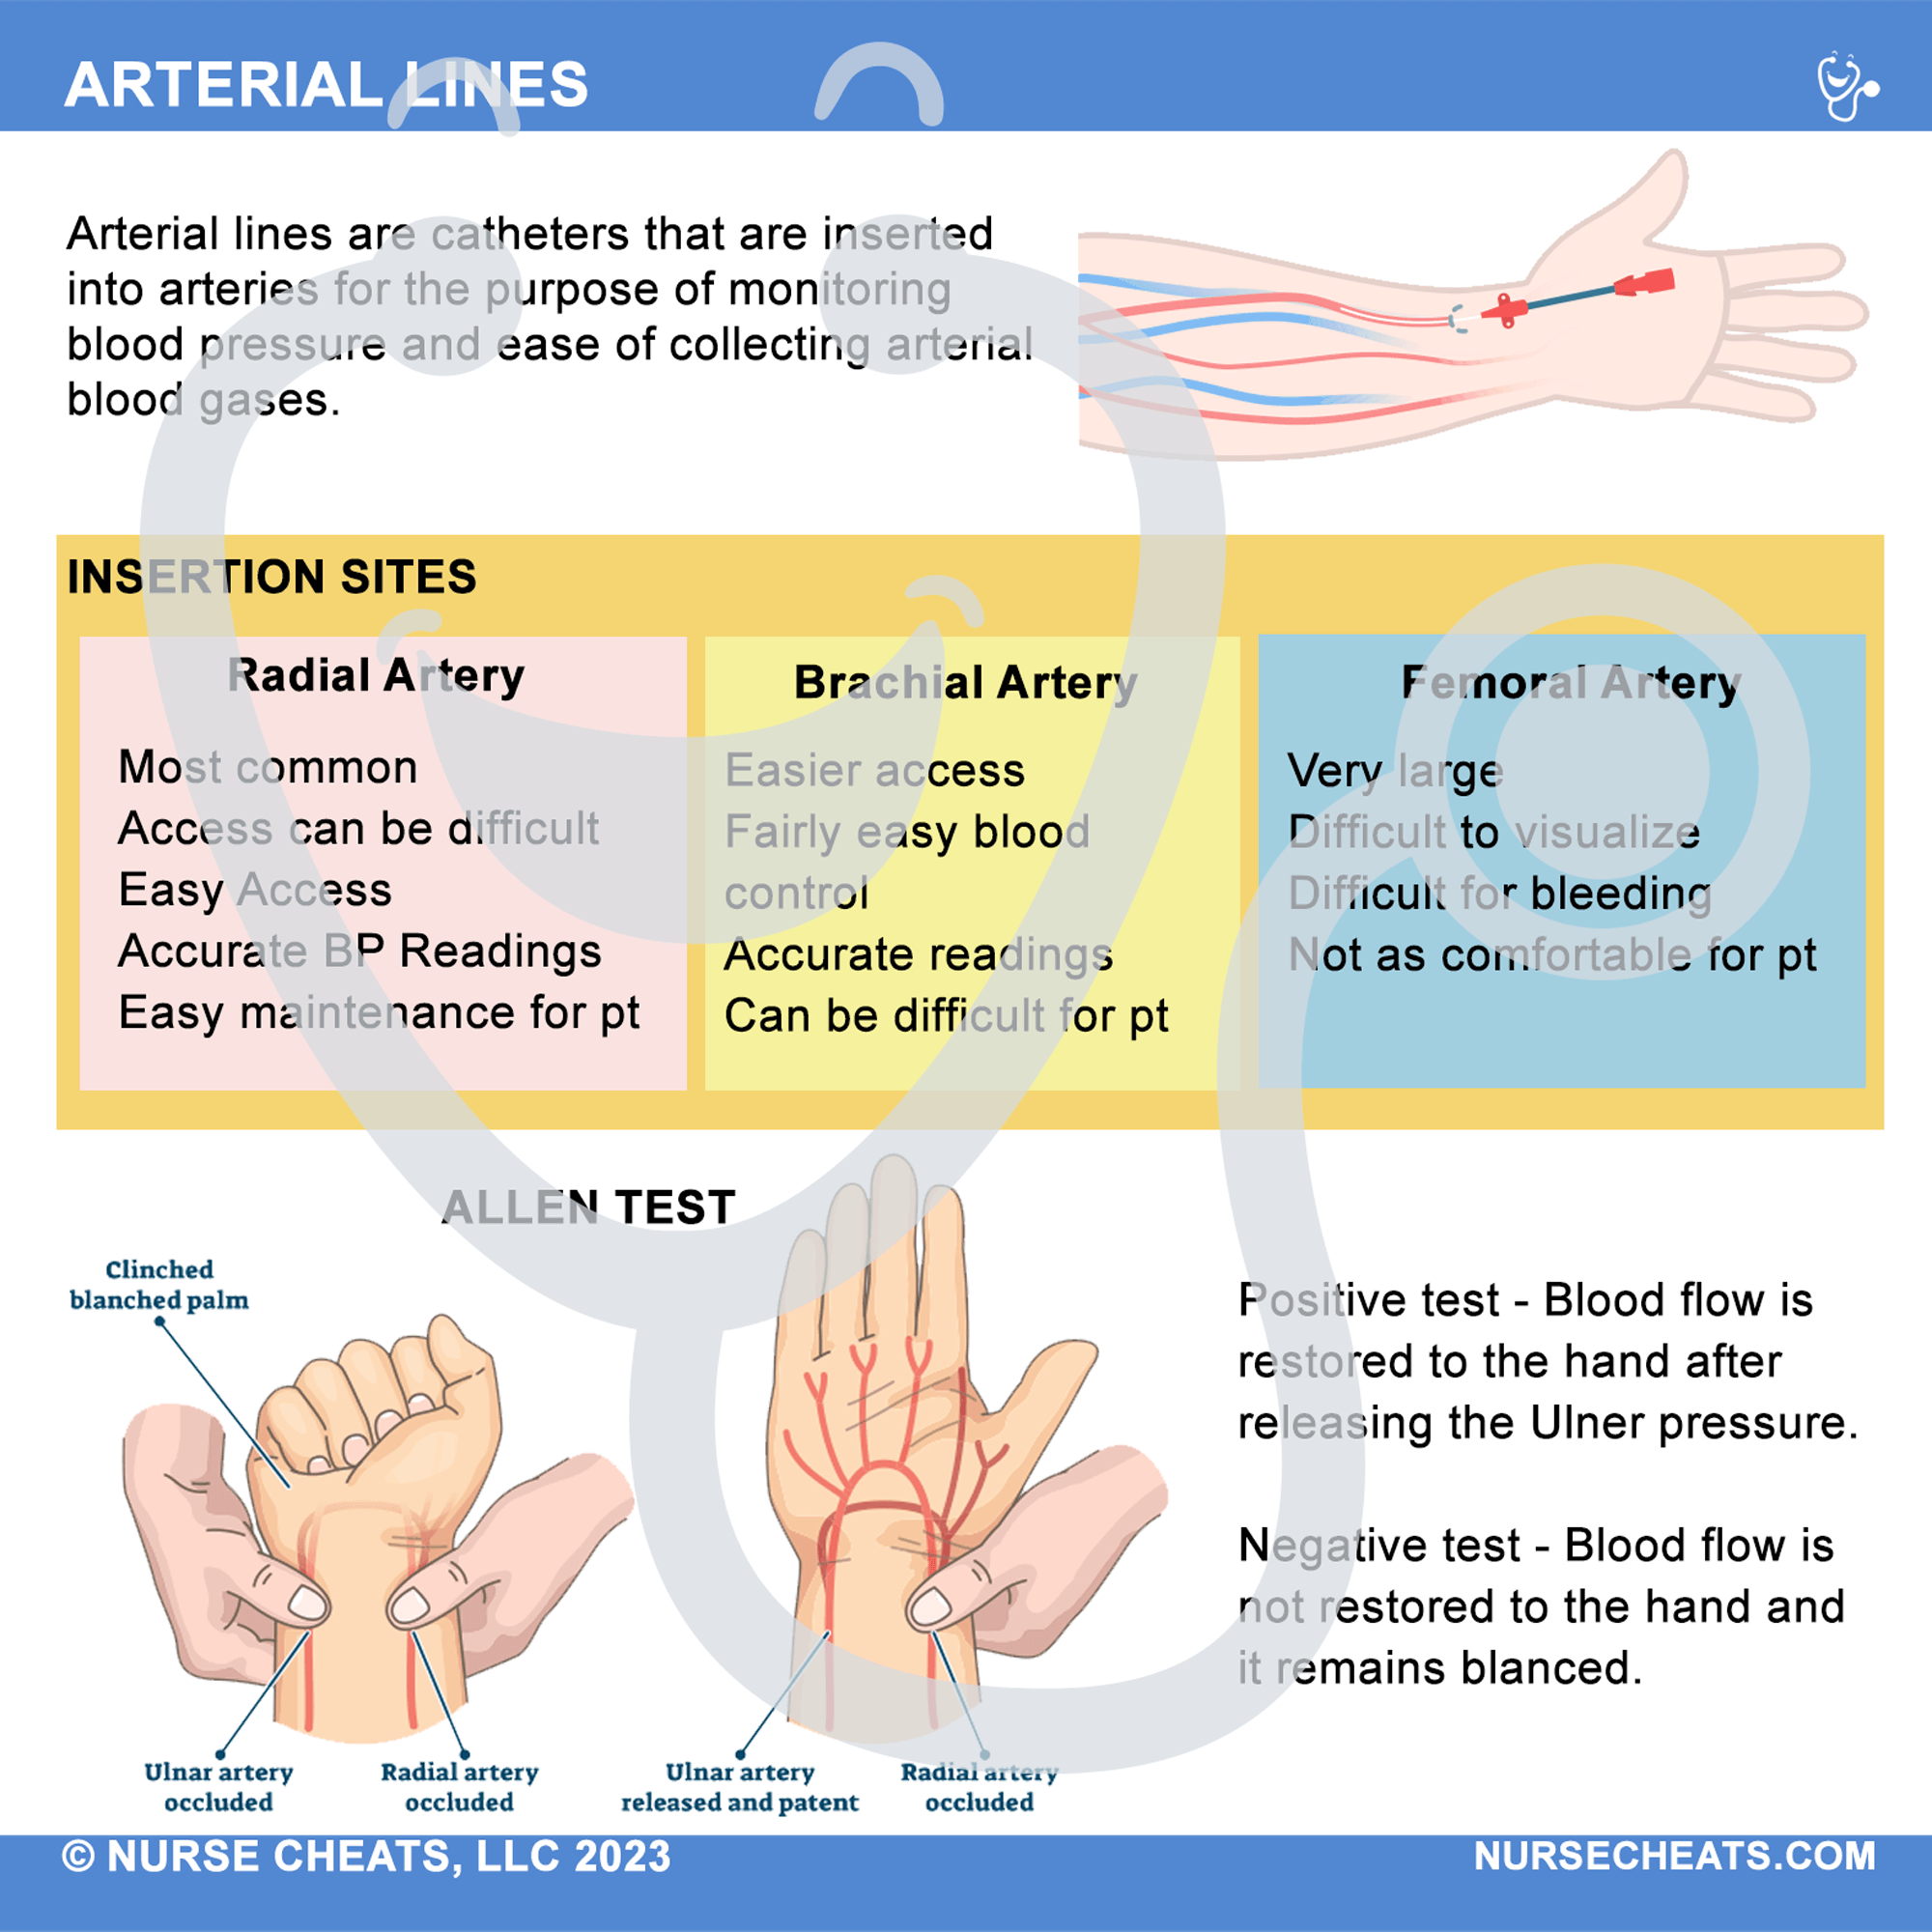 Side 1 of our Arterial Lines Badge Buddy contains Radial Artery, Brachial Artery, Femoral Artery, and the Allen Test.